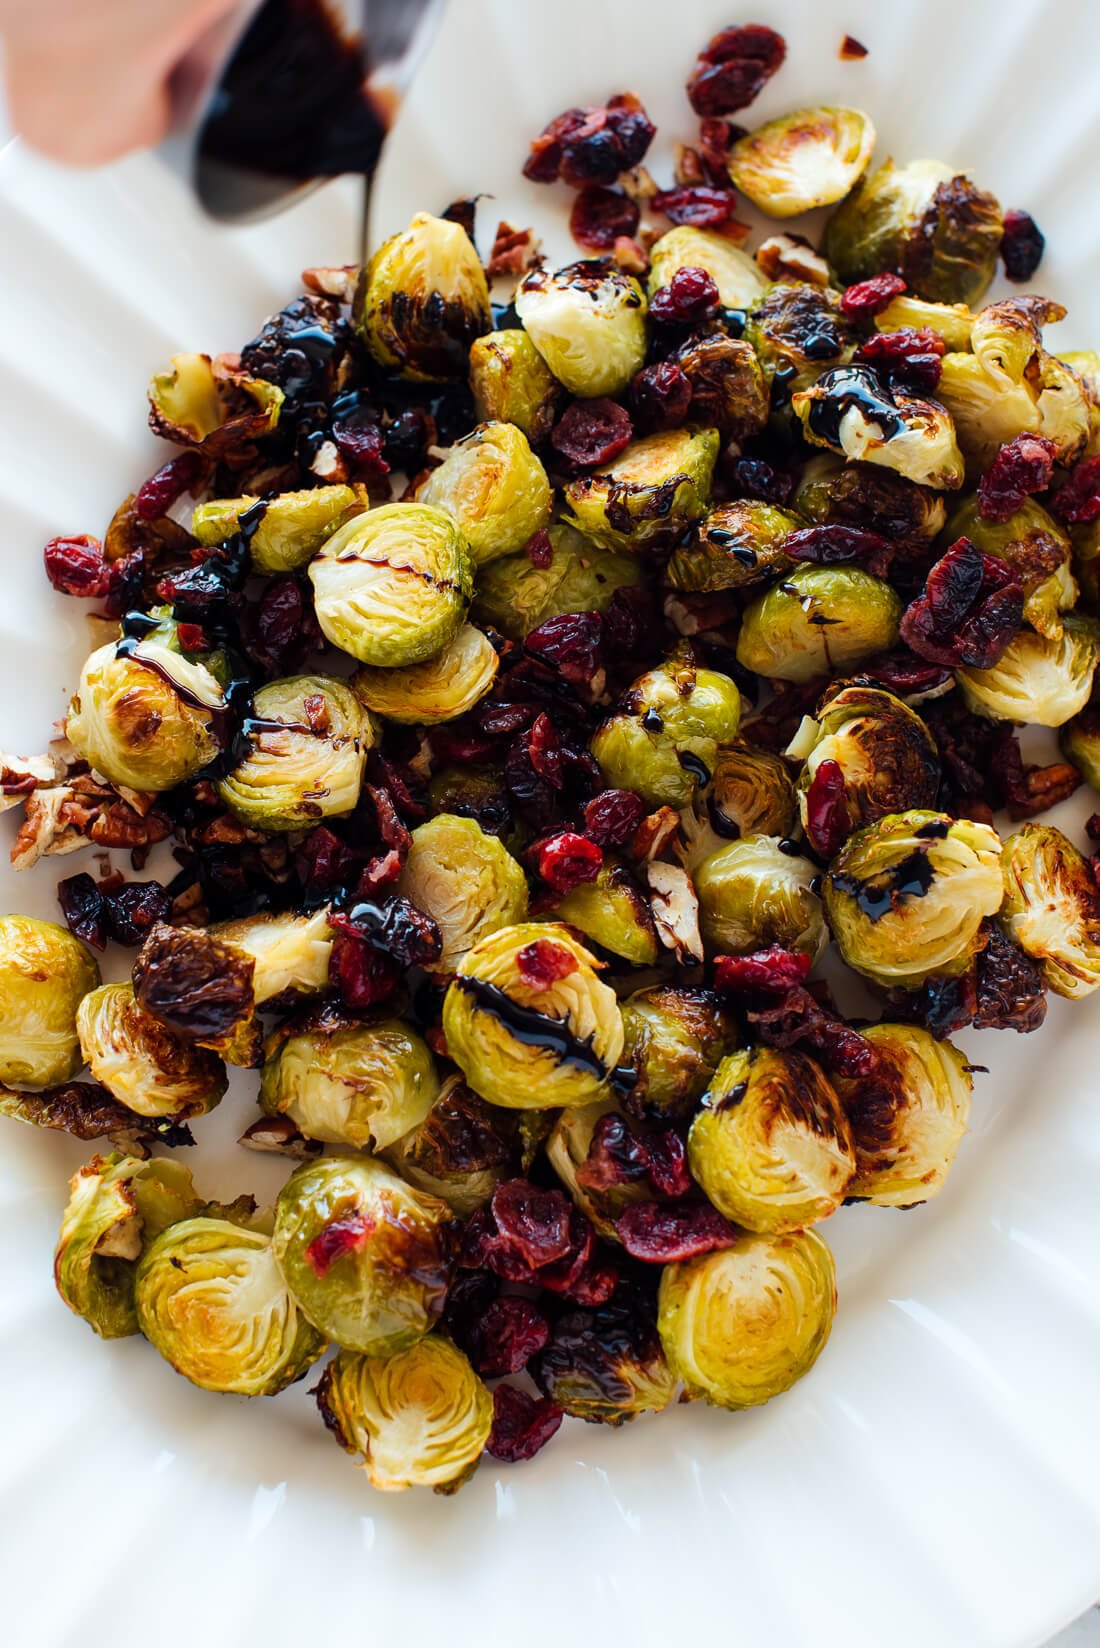 roasted brussels sprouts with balsamic vinegar drizzle